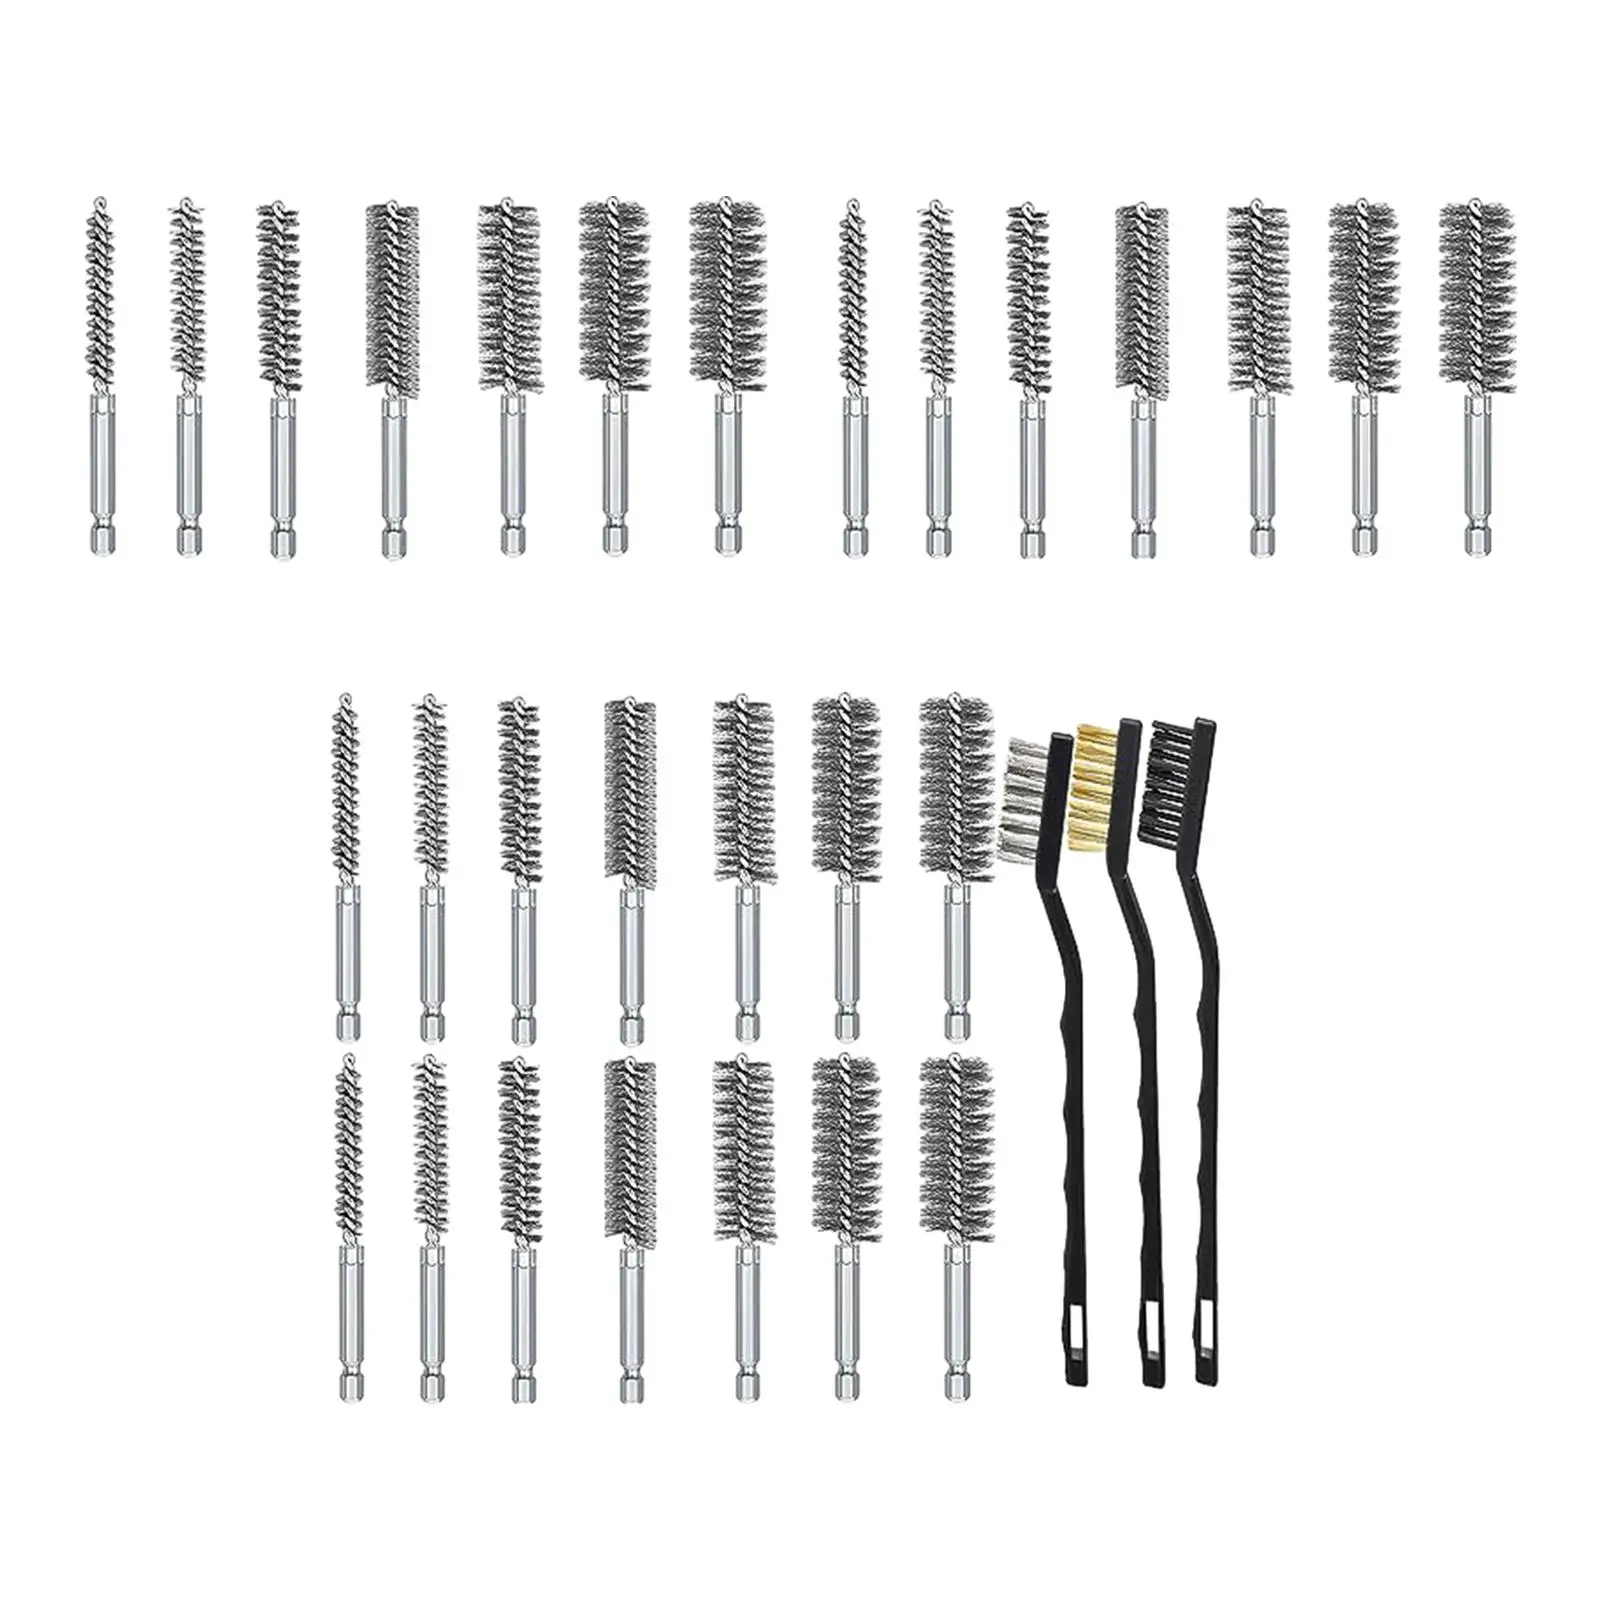 Wire Bore Brush Set Accessories Sturdy Durable 8mm-25mm Different Sizes for Power Drill 1/4 inch Hex Shank Cleaning Wire Brushes